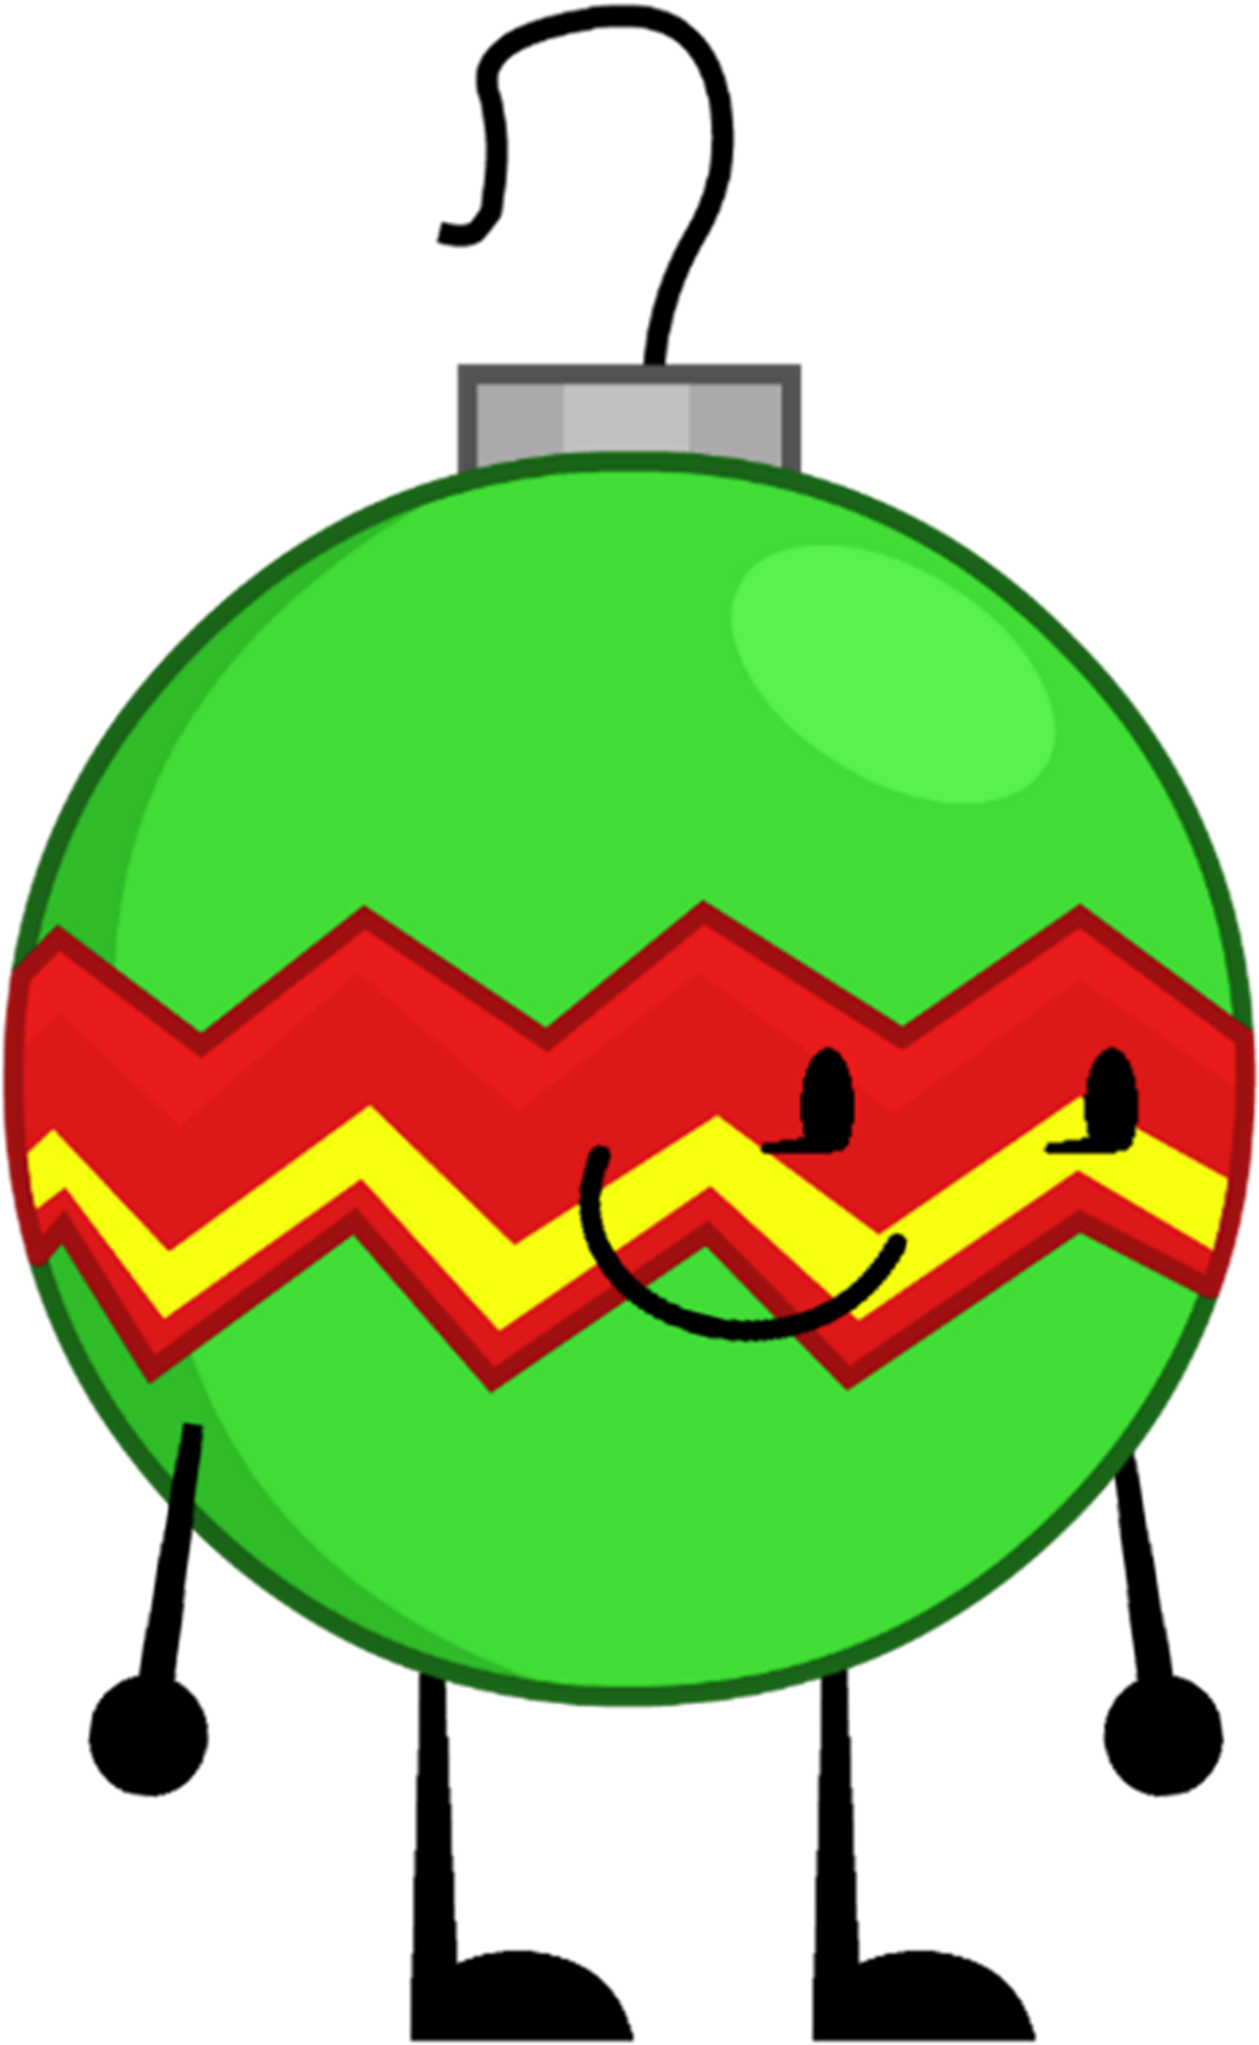 Bauble - Object Redundancy Briefcase Pose (1522x2084)